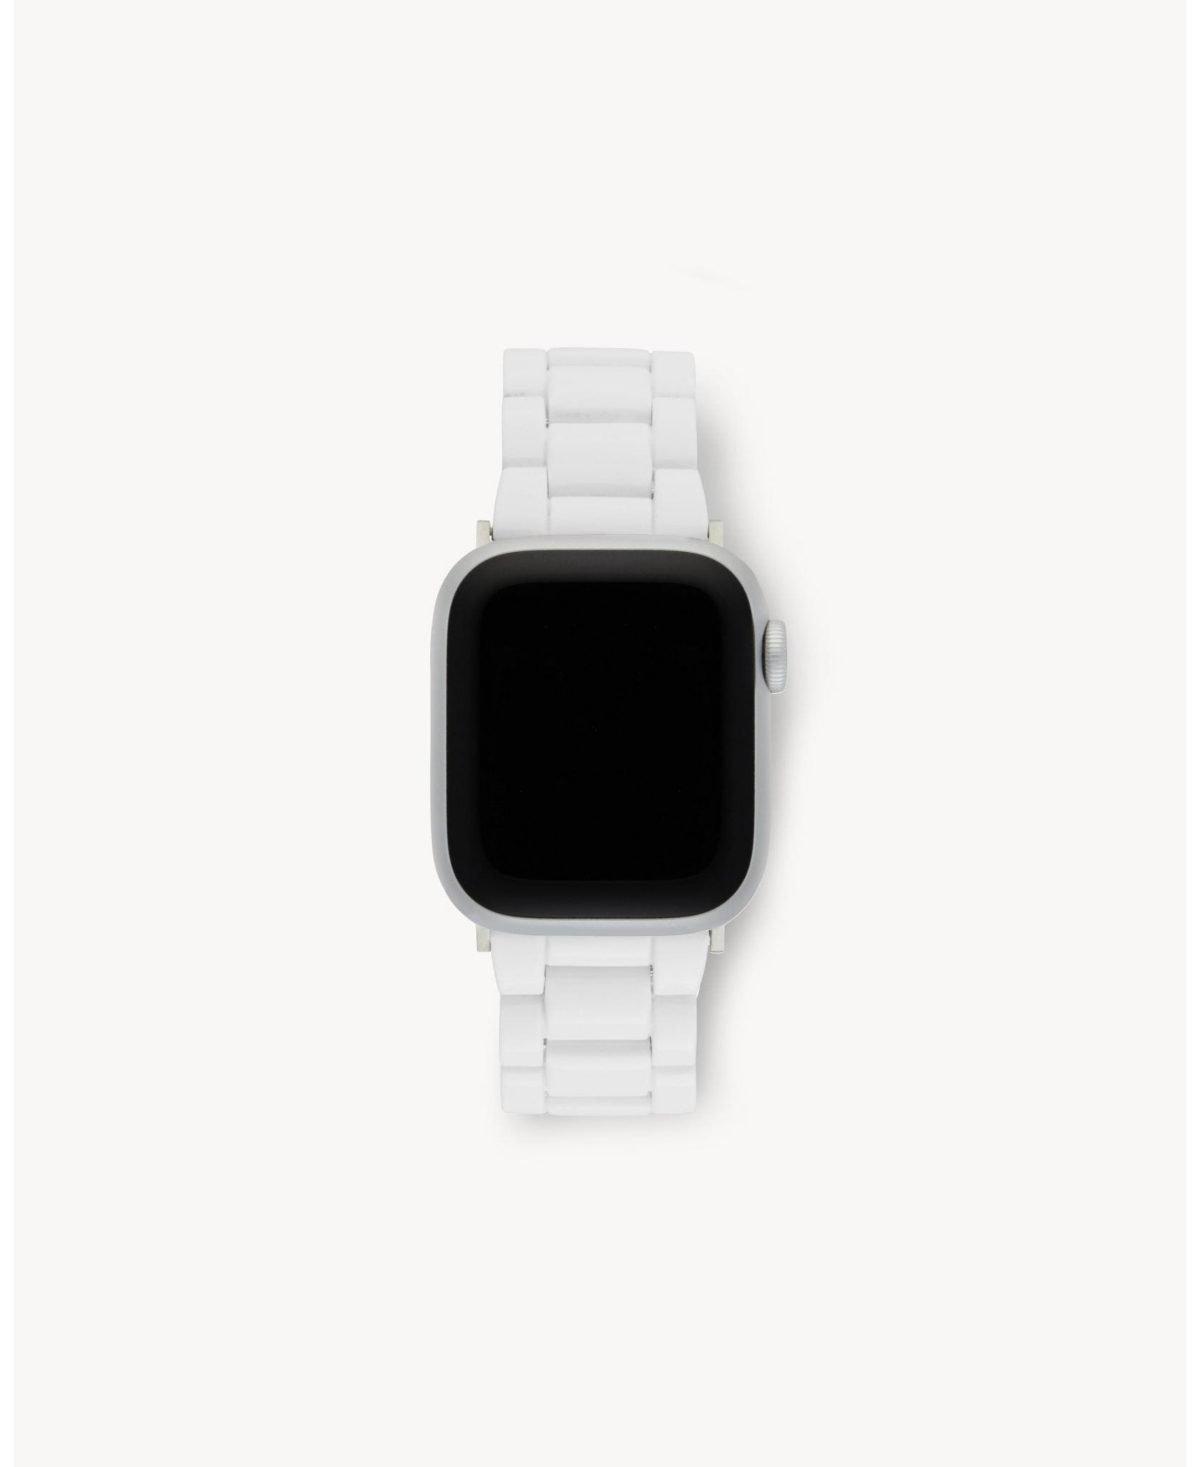 Apple Watch Band in White Universal Fit / Black Hardware - Silver